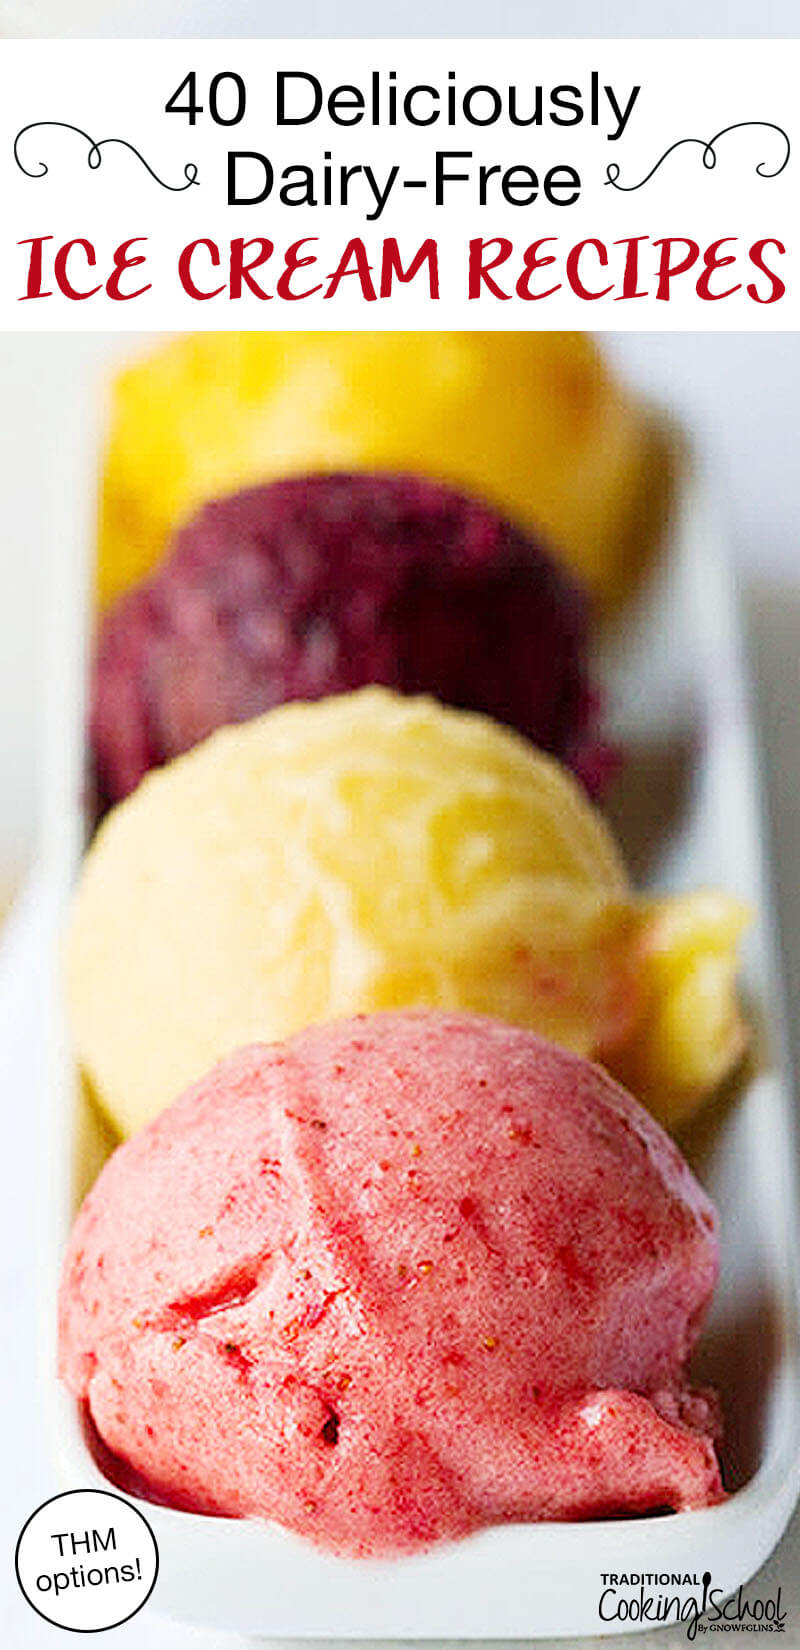 scoops of brightly colored ice creams in a row. Text overlay: "40 Deliciously Dairy-Free Ice Cream Recipes (THM options!)"